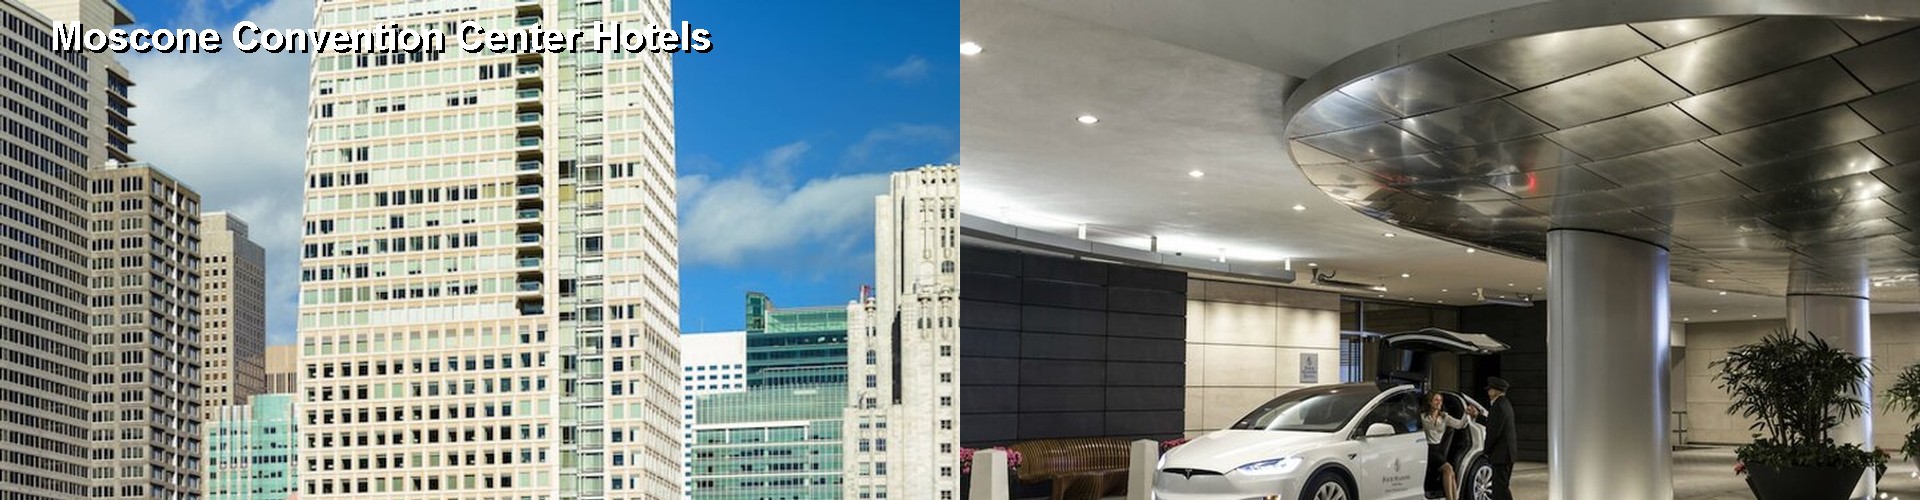 5 Best Hotels near Moscone Convention Center